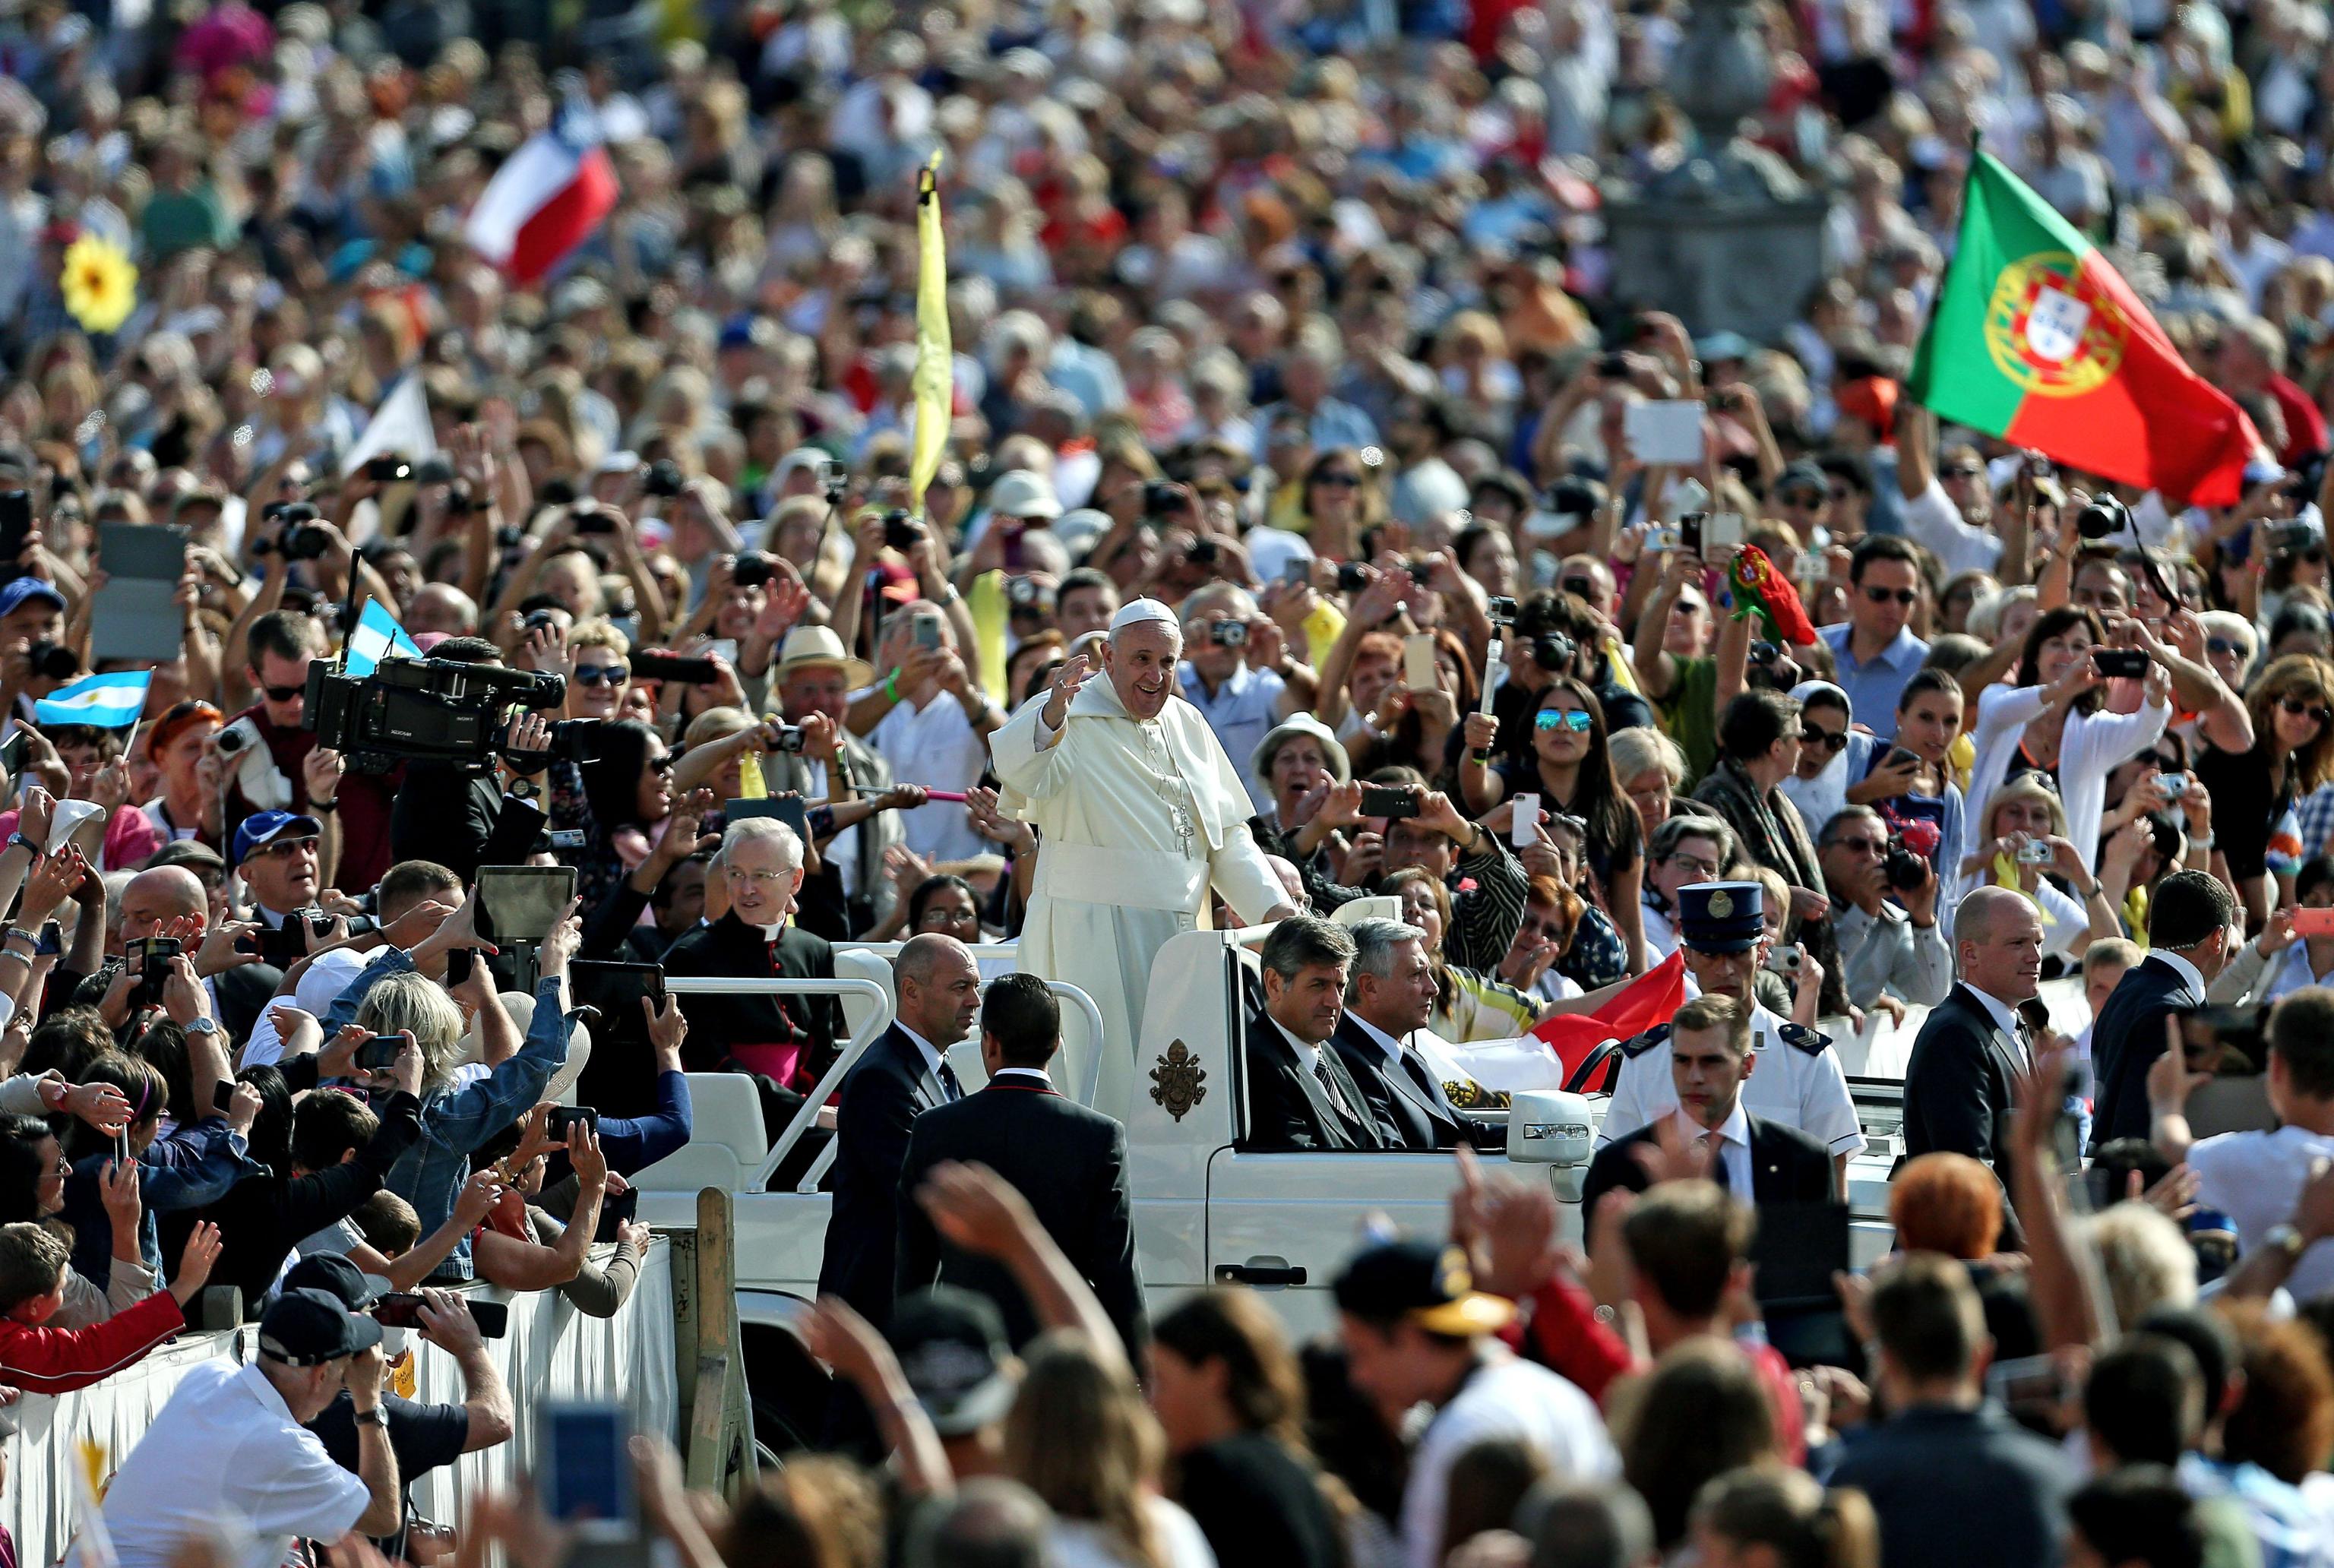 Pope Francis arrives to lead the weekly general audience in Saint Peters Square